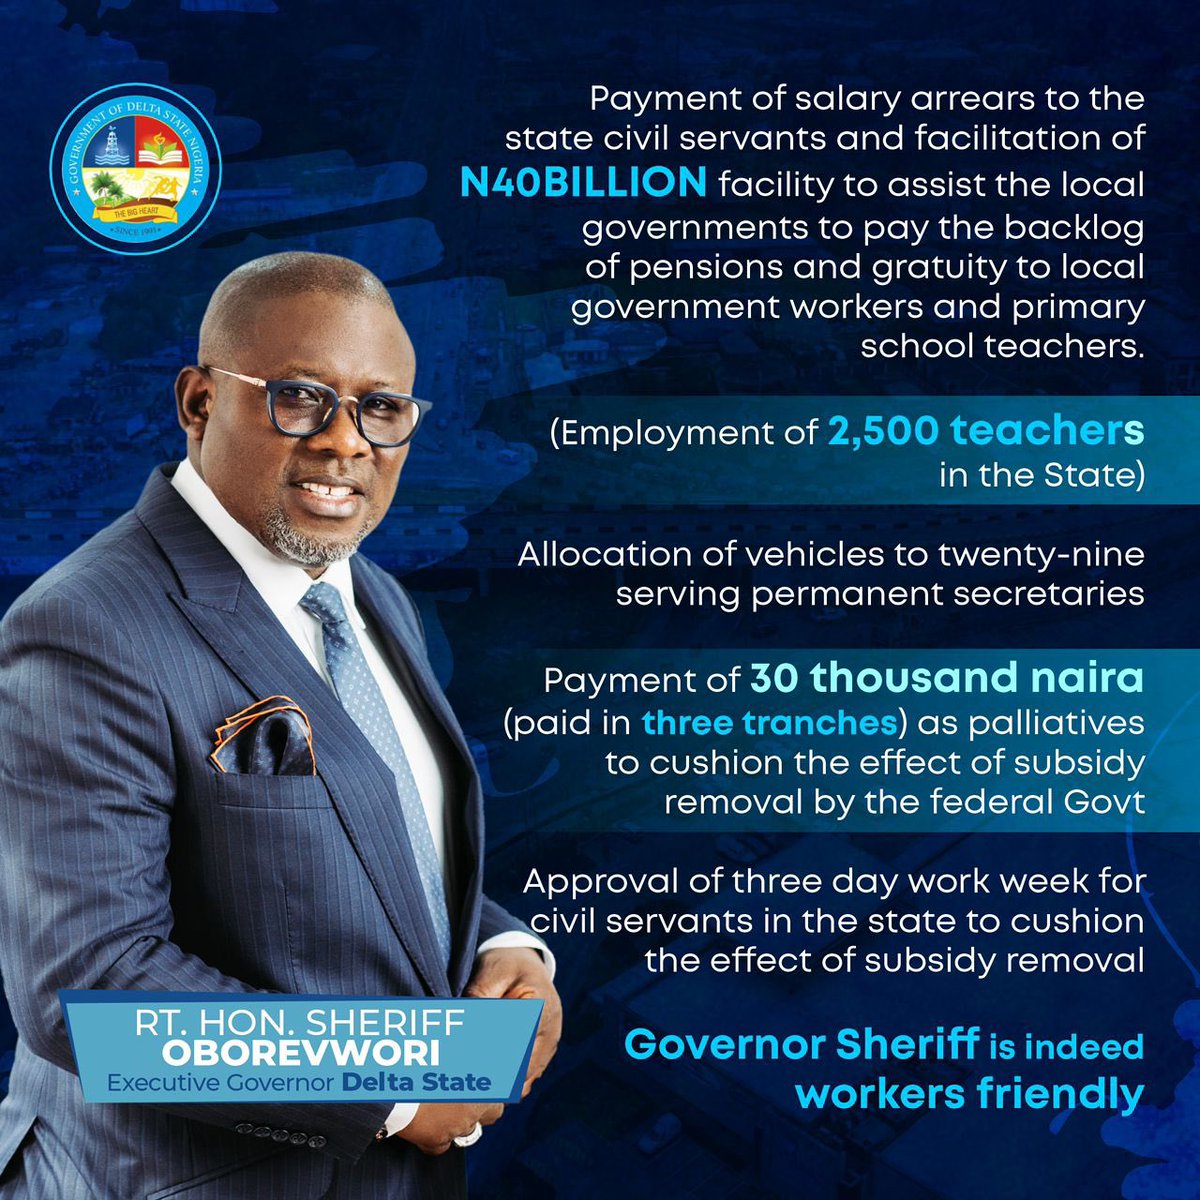 Empathy continues to be a defining trait of effective leadership. Governor Sheriff truly embodies the title of 'The People’s Governor'. #More4Deltans #EXPECTMORE #AdvancingDelta'